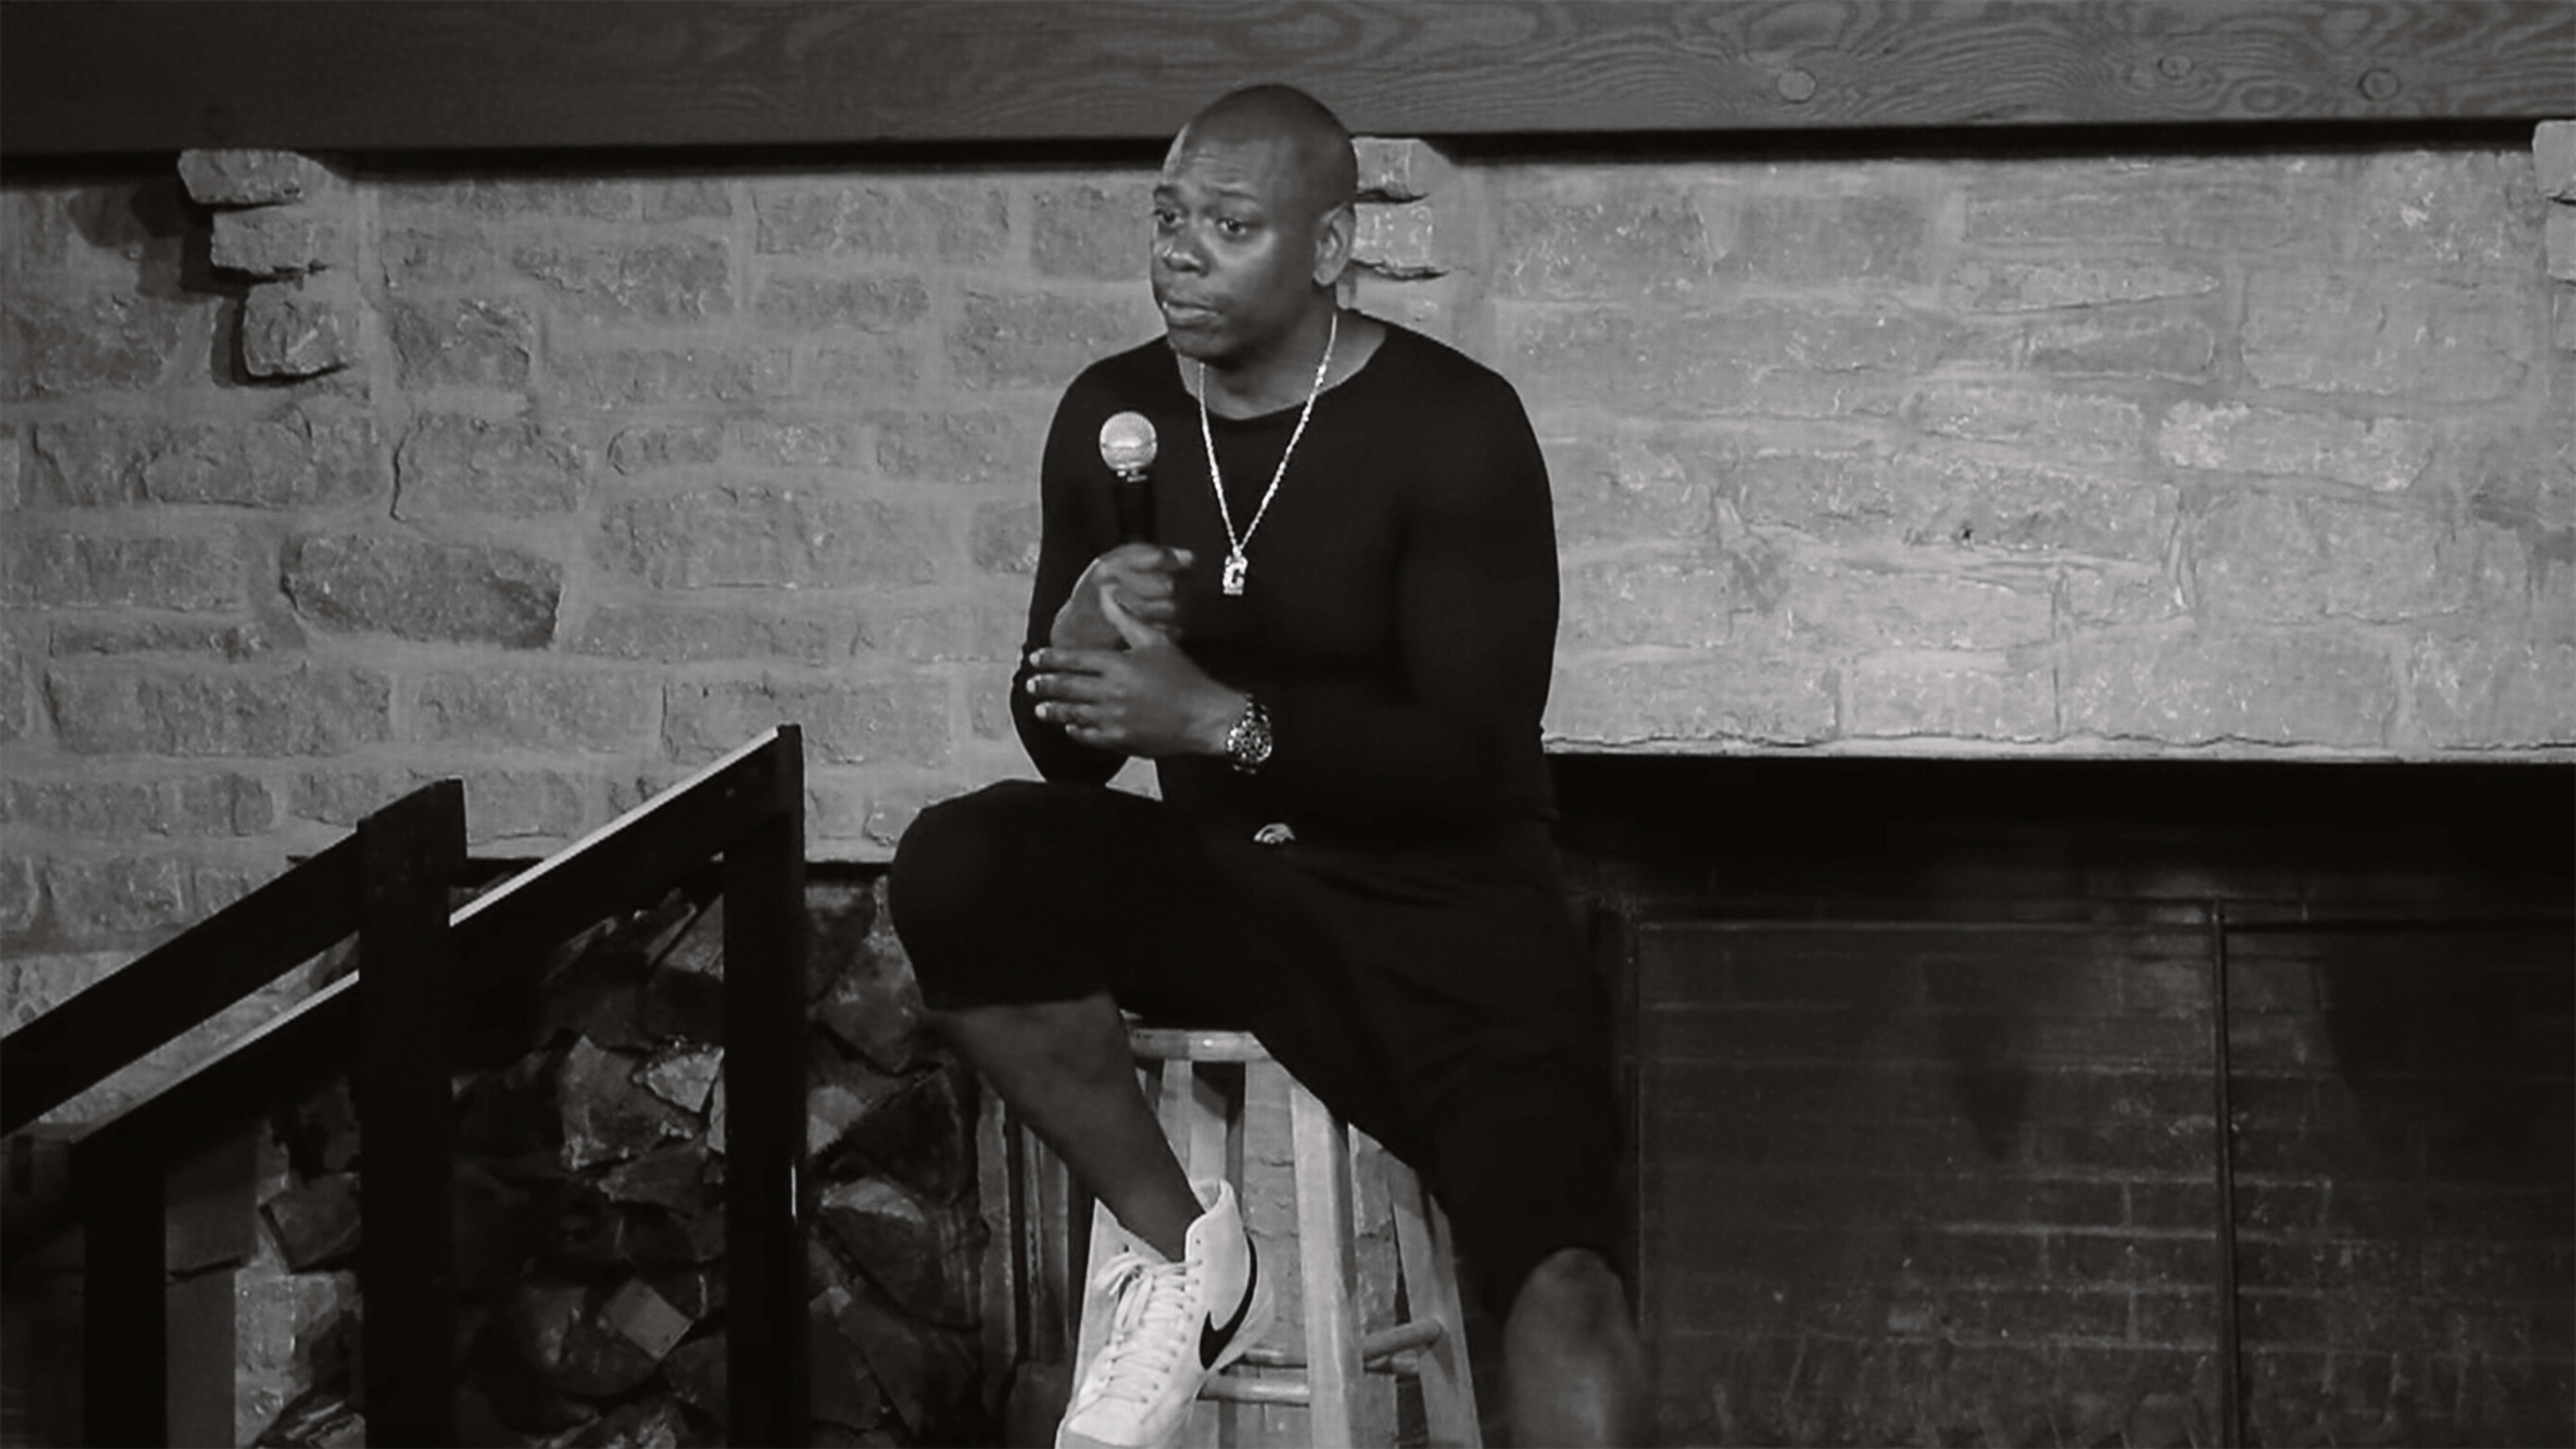 Dave Chappelle just surprise-dropped his rawest Netflix special yet, inspired by George Floyd